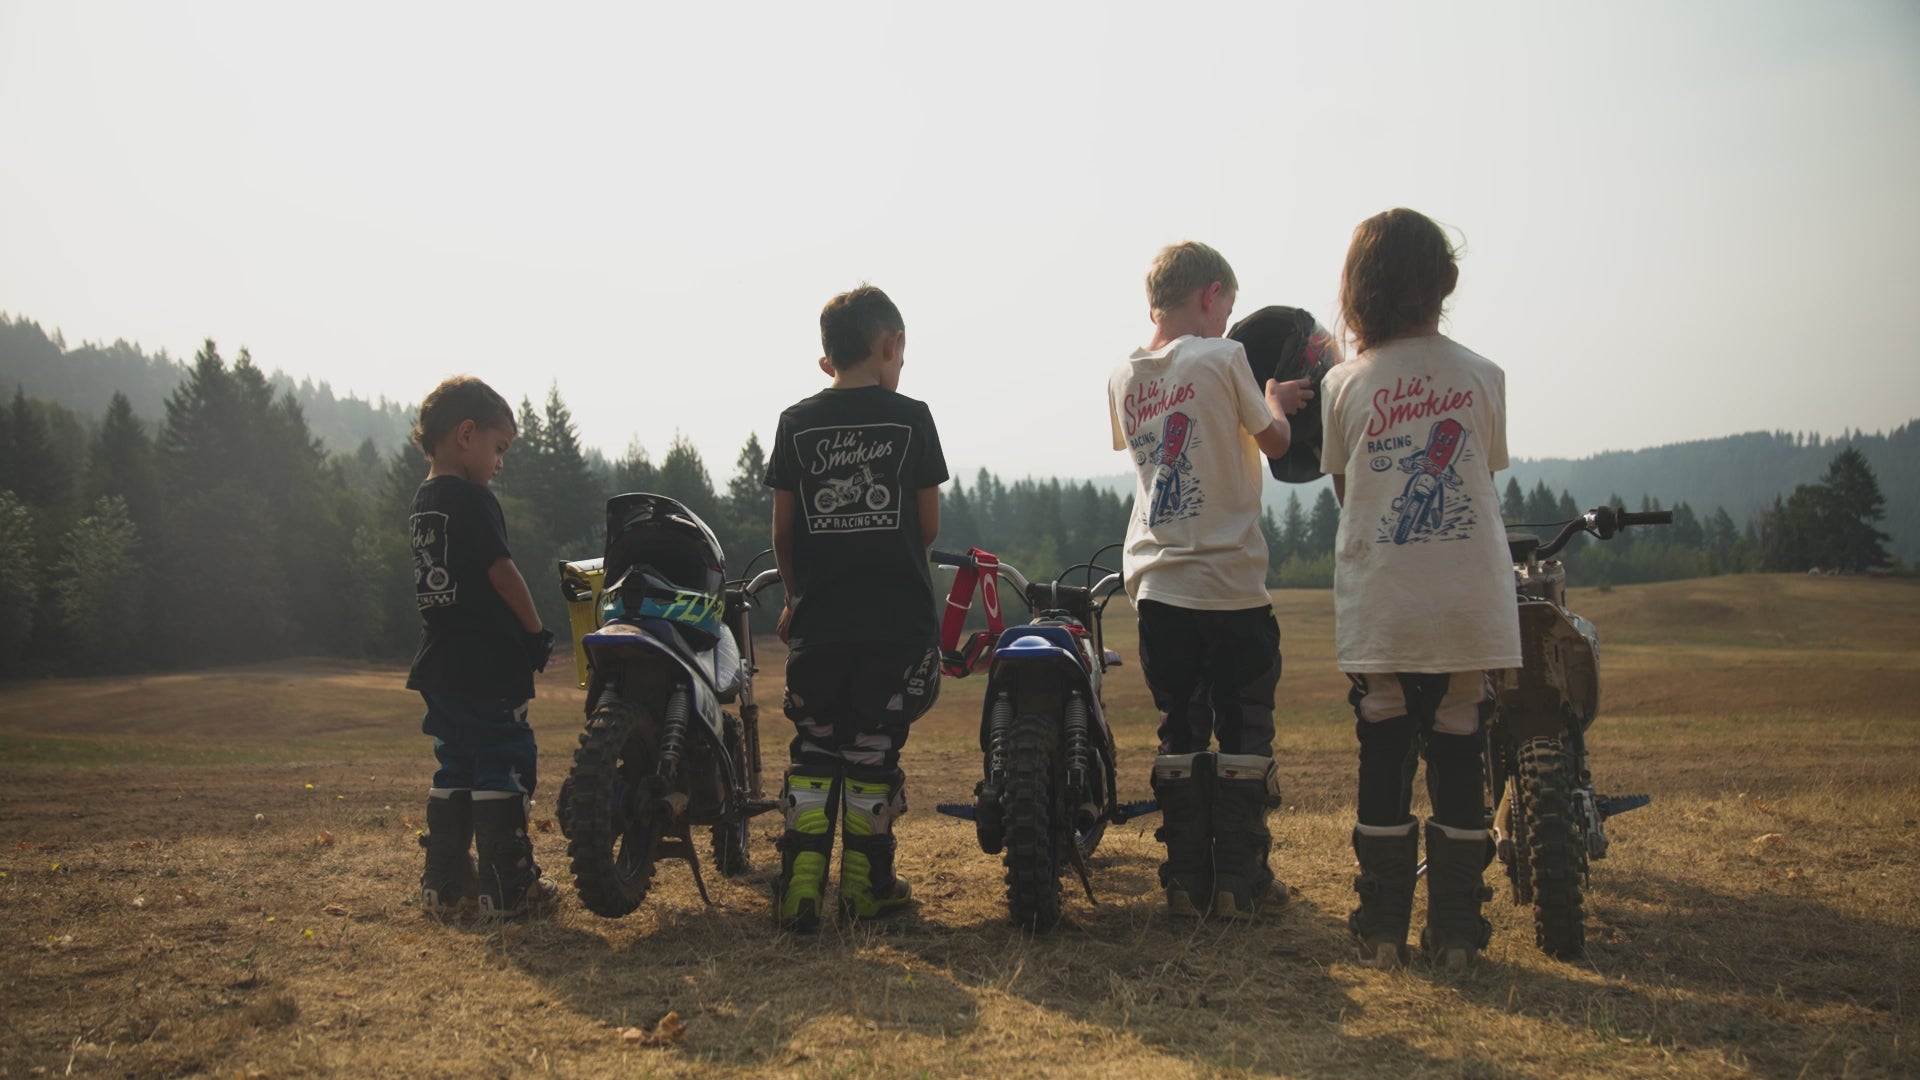 Load video: Video feature lil&#39; smokies racing apparel. Multiple models wearing lil smokies apparel while riding motorcycles and racing dirt bikes at Washougal MX motocross track. 